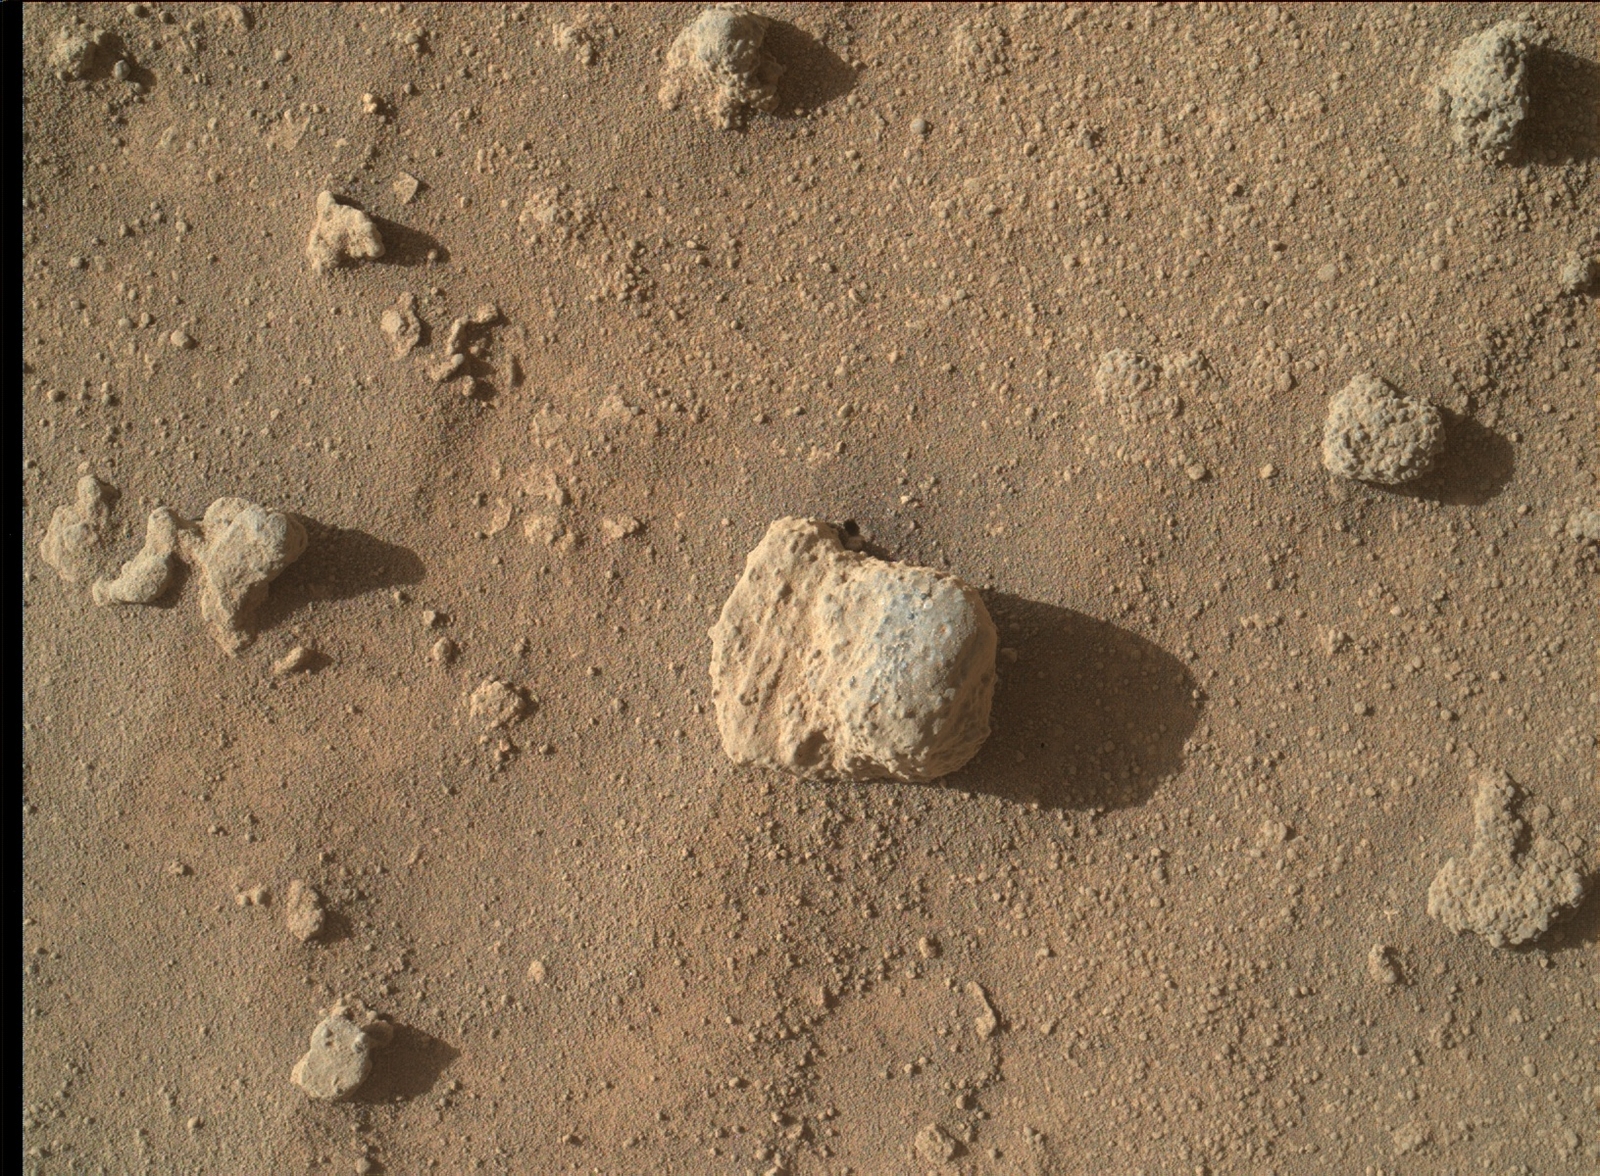 The nodule in the center of this March 10, 2016, image from the Mars Hand Lens Imager (MAHLI) on NASA's Curiosity Mars rover shows individual grains of sand and (on the right) laminations from the sandstone deposit in which the nodule formed..